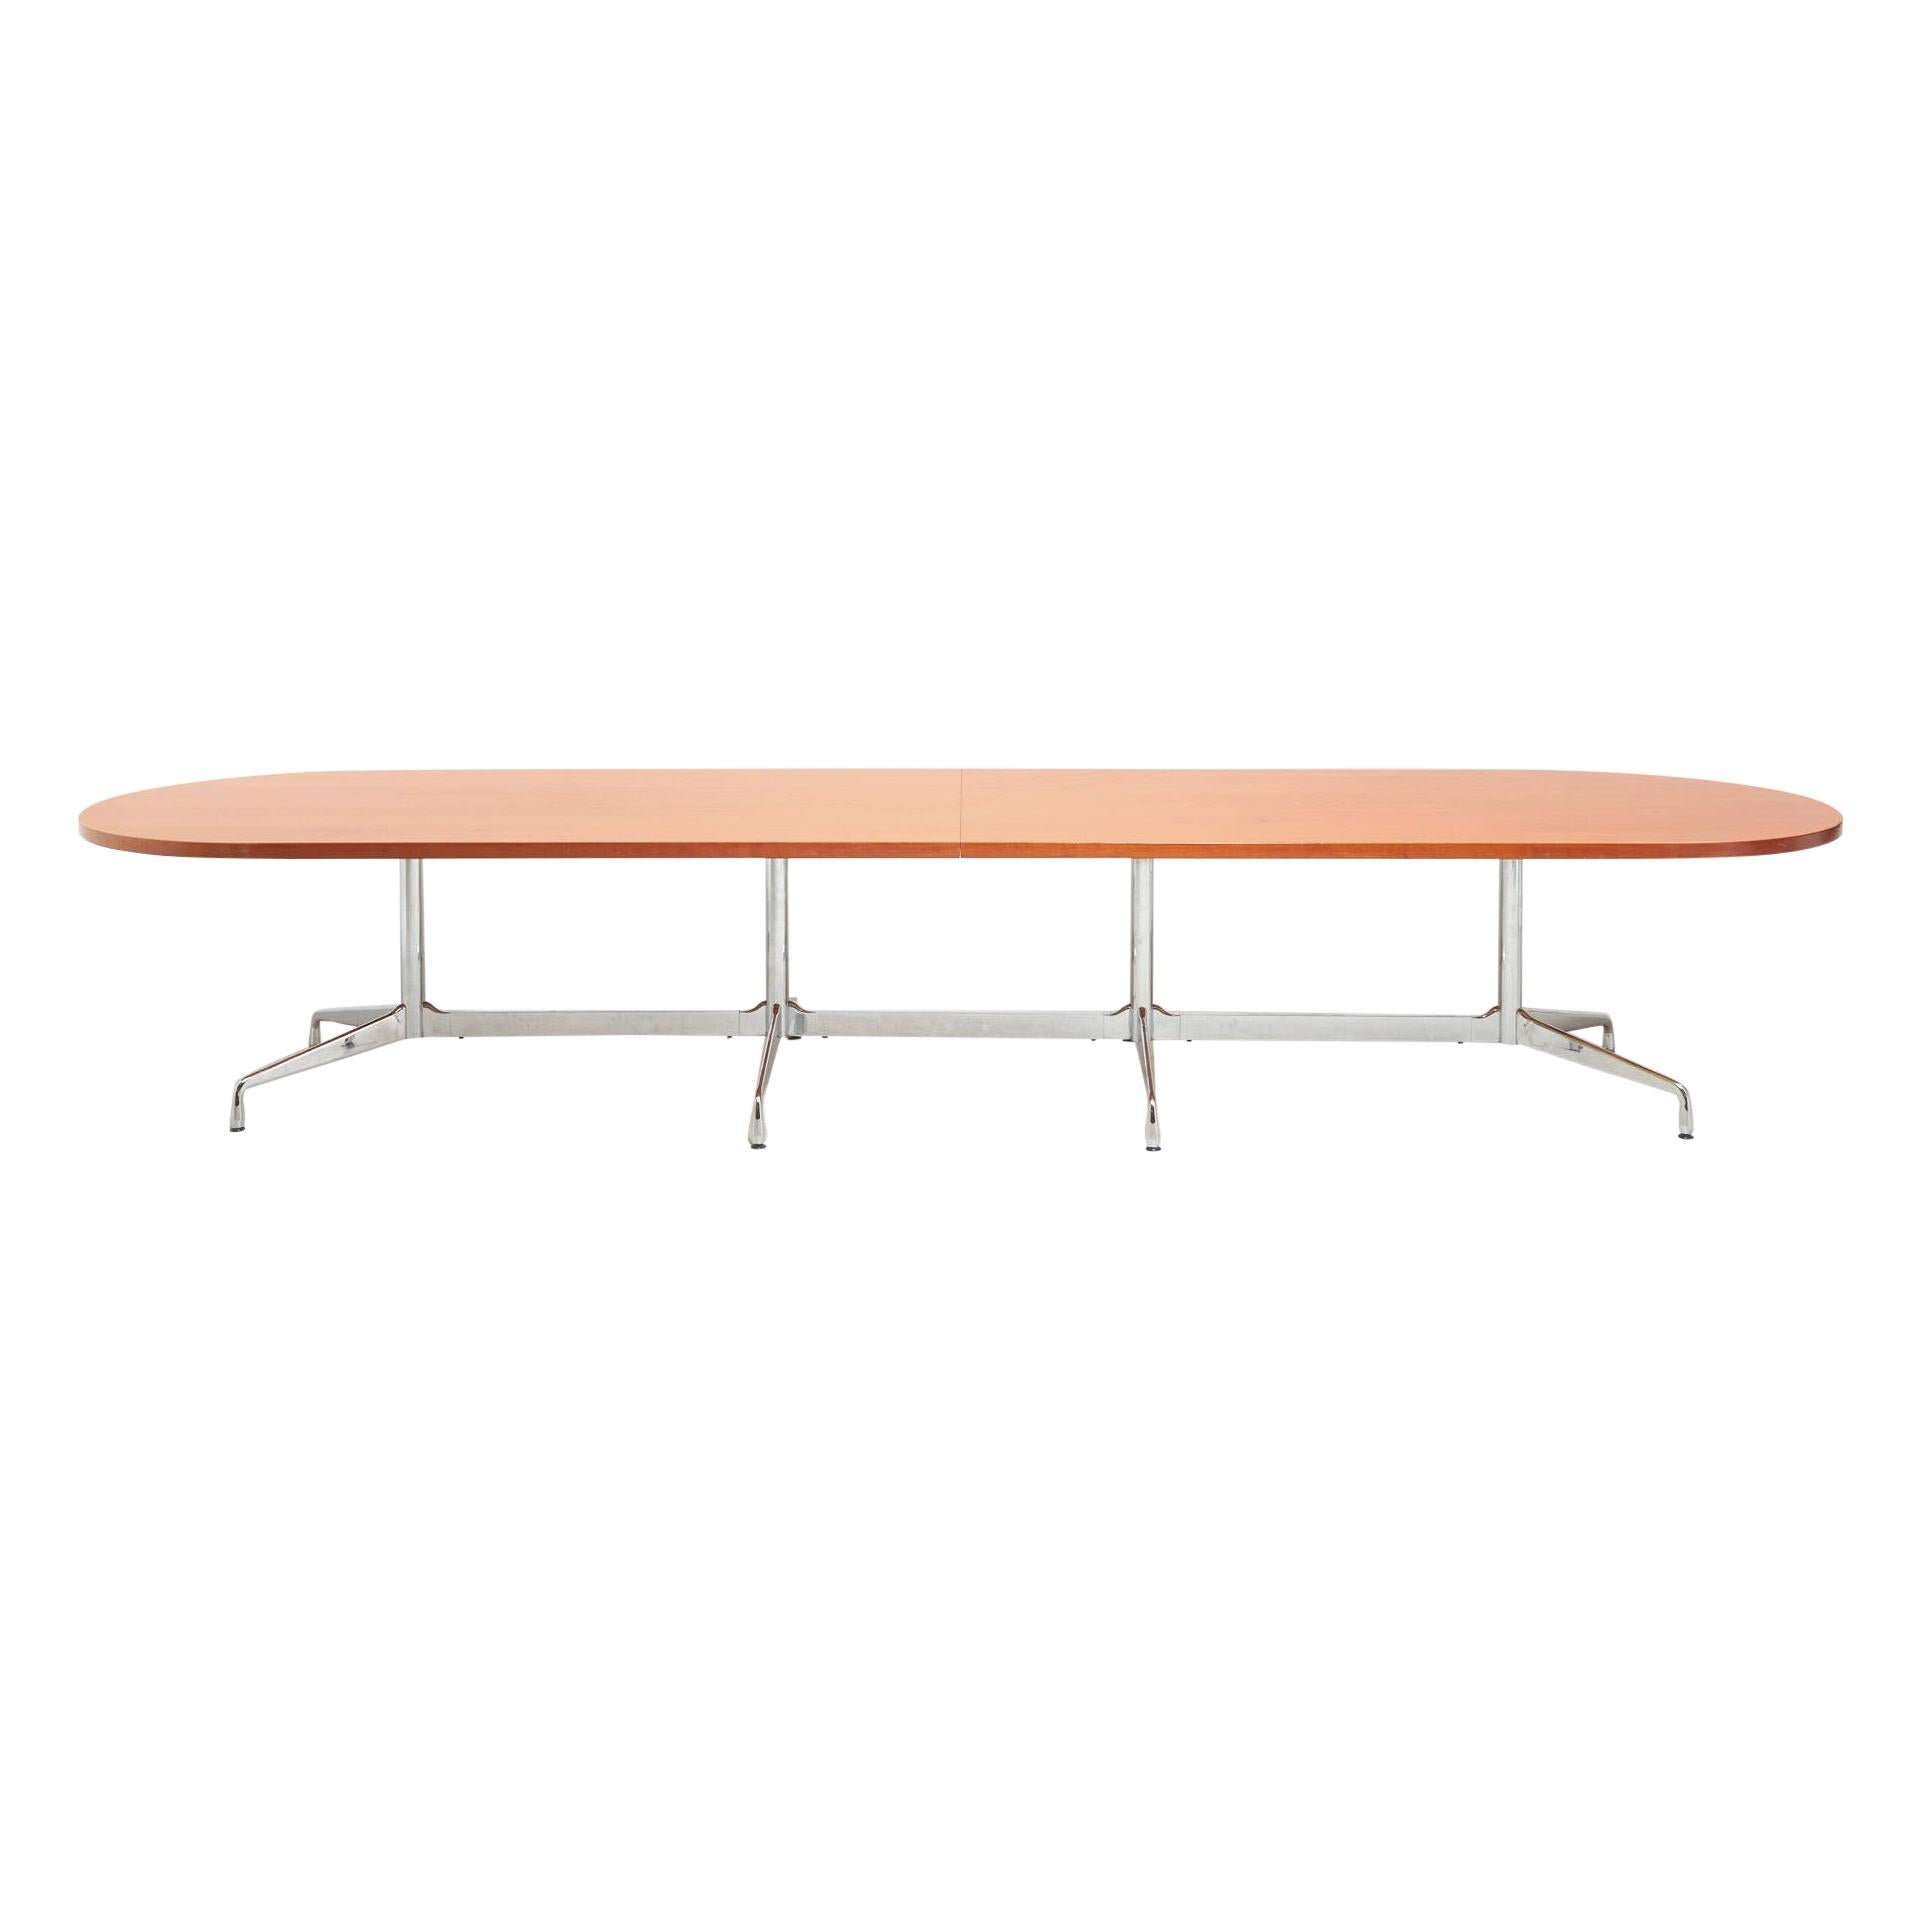 Extra Large Segmented Base table, by Charles & Ray Eames